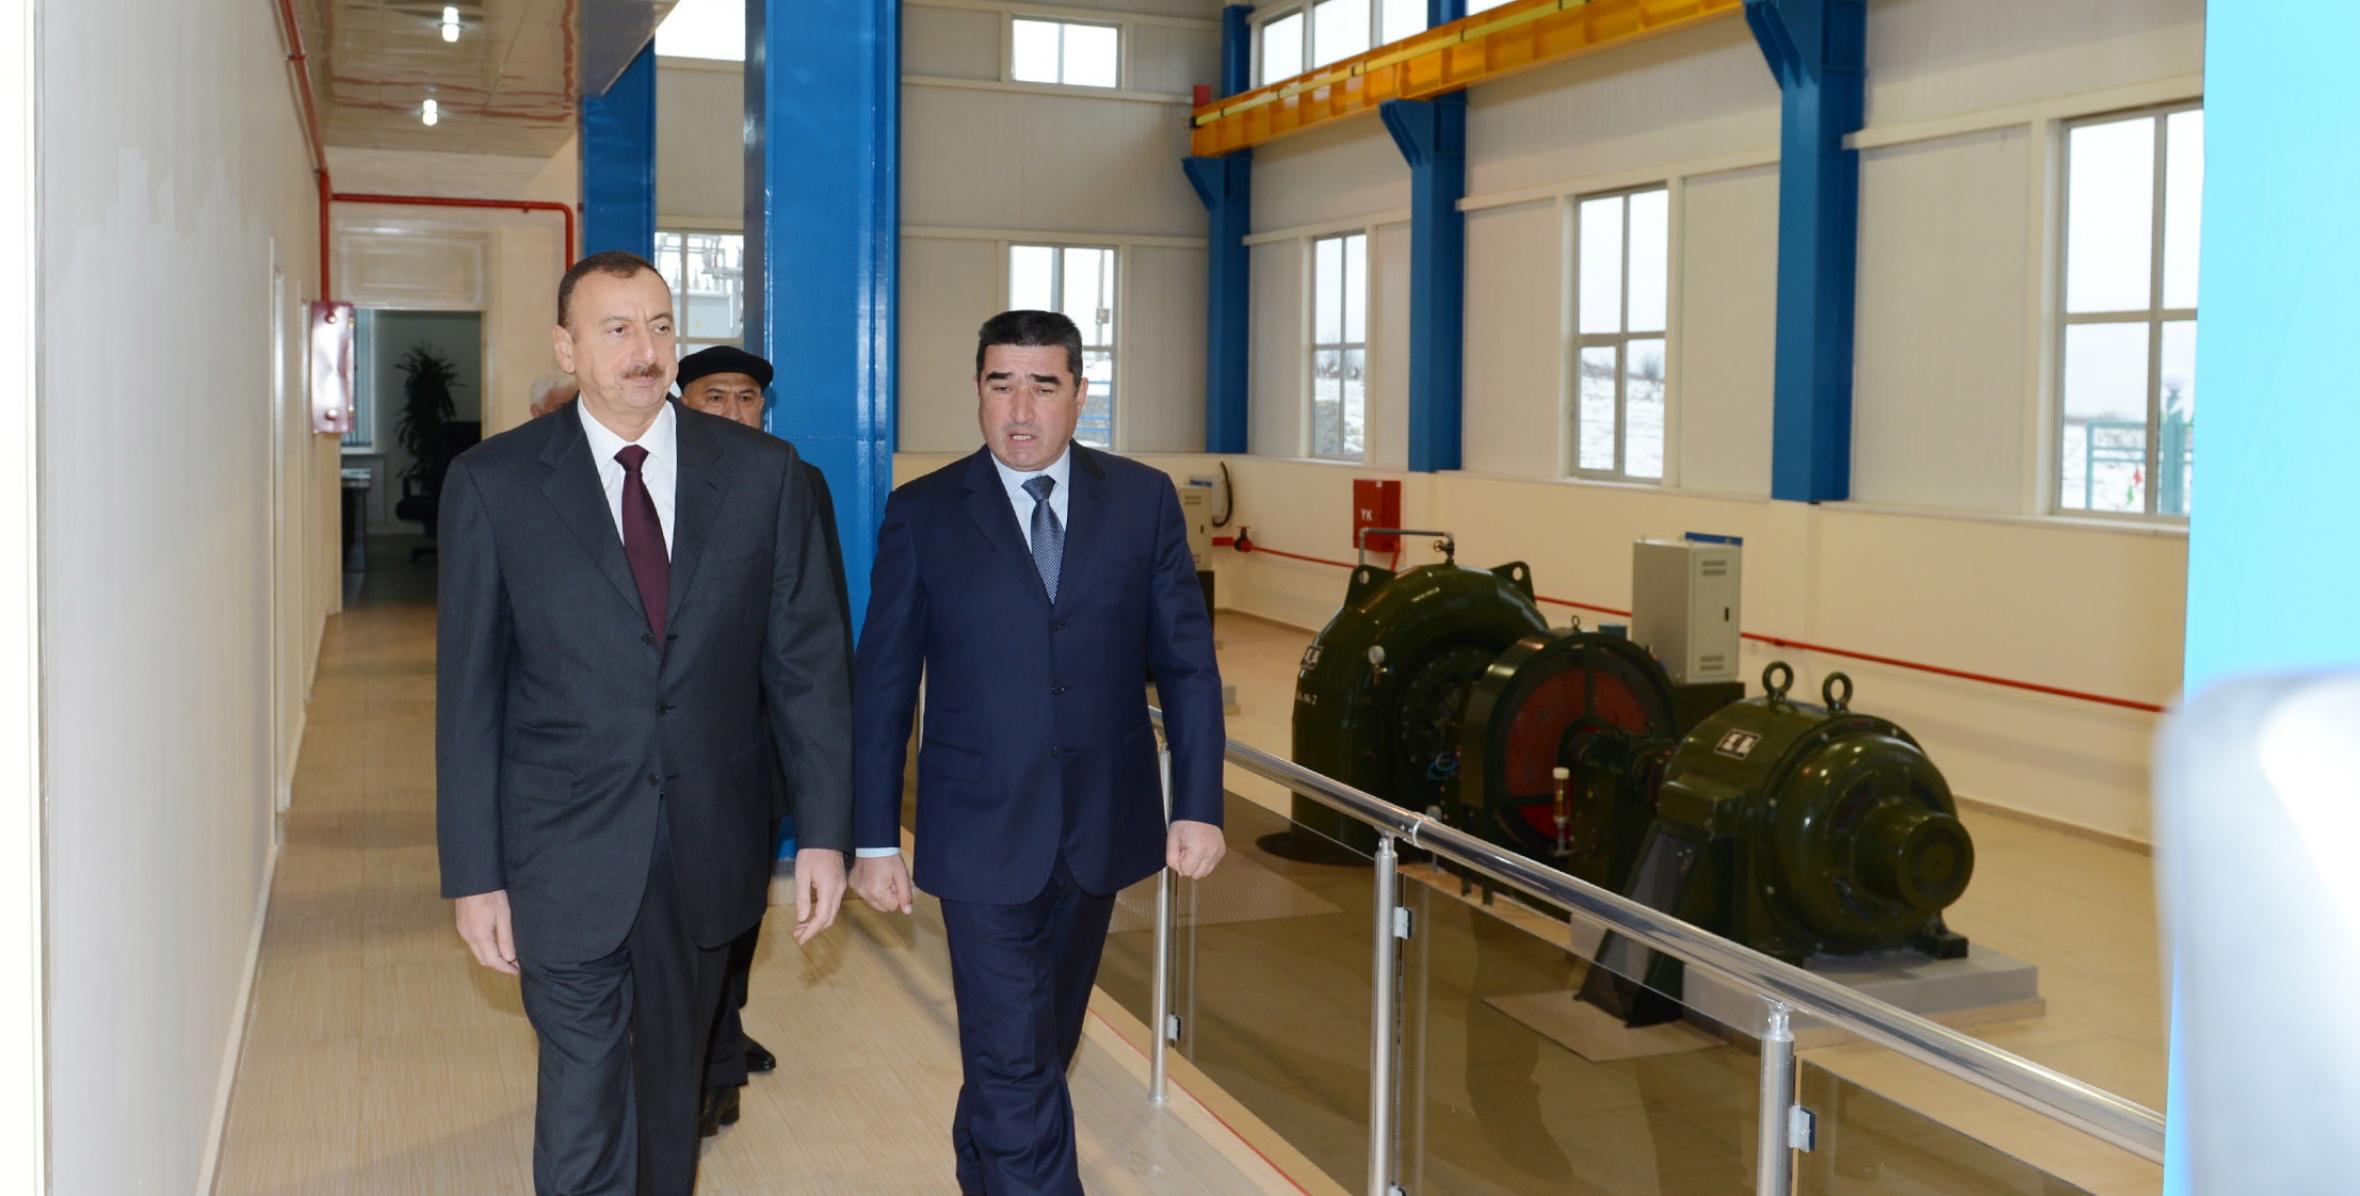 Ilham Aliyev arrived in Gusar District